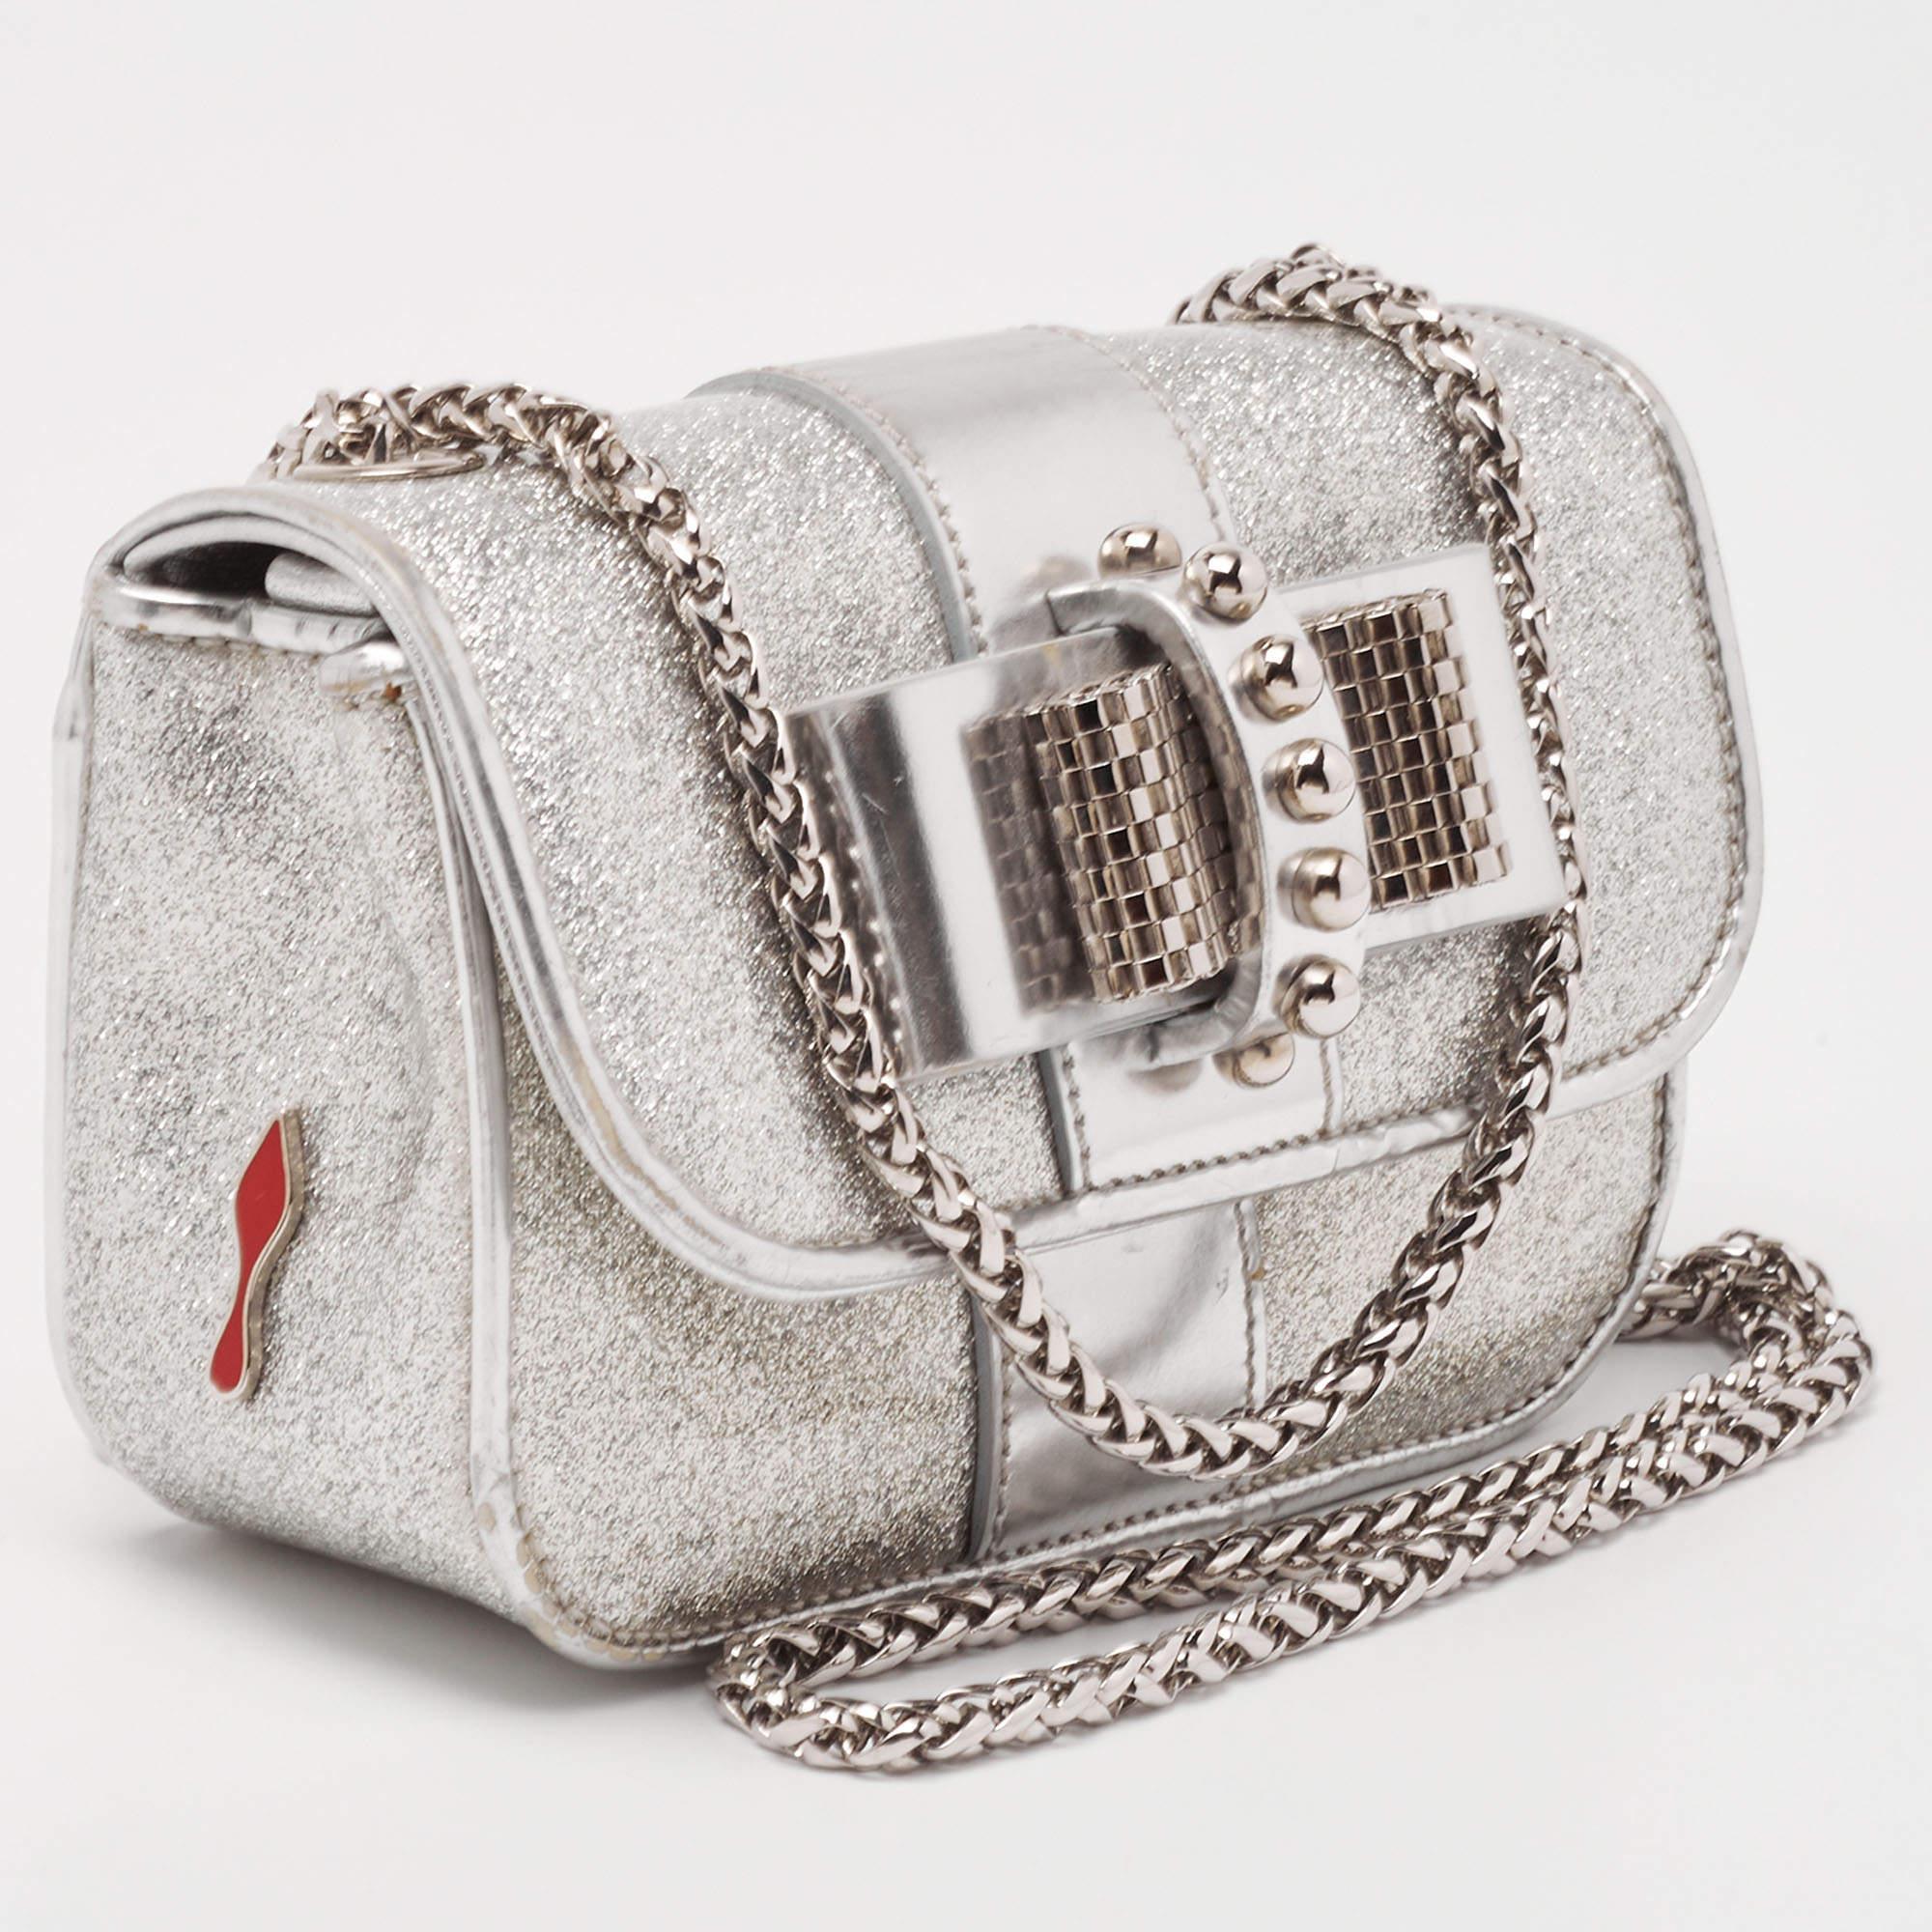 Women's or Men's Christian Louboutin Silver Patent Leather Mini Spiked Sweet Charity Crossbody